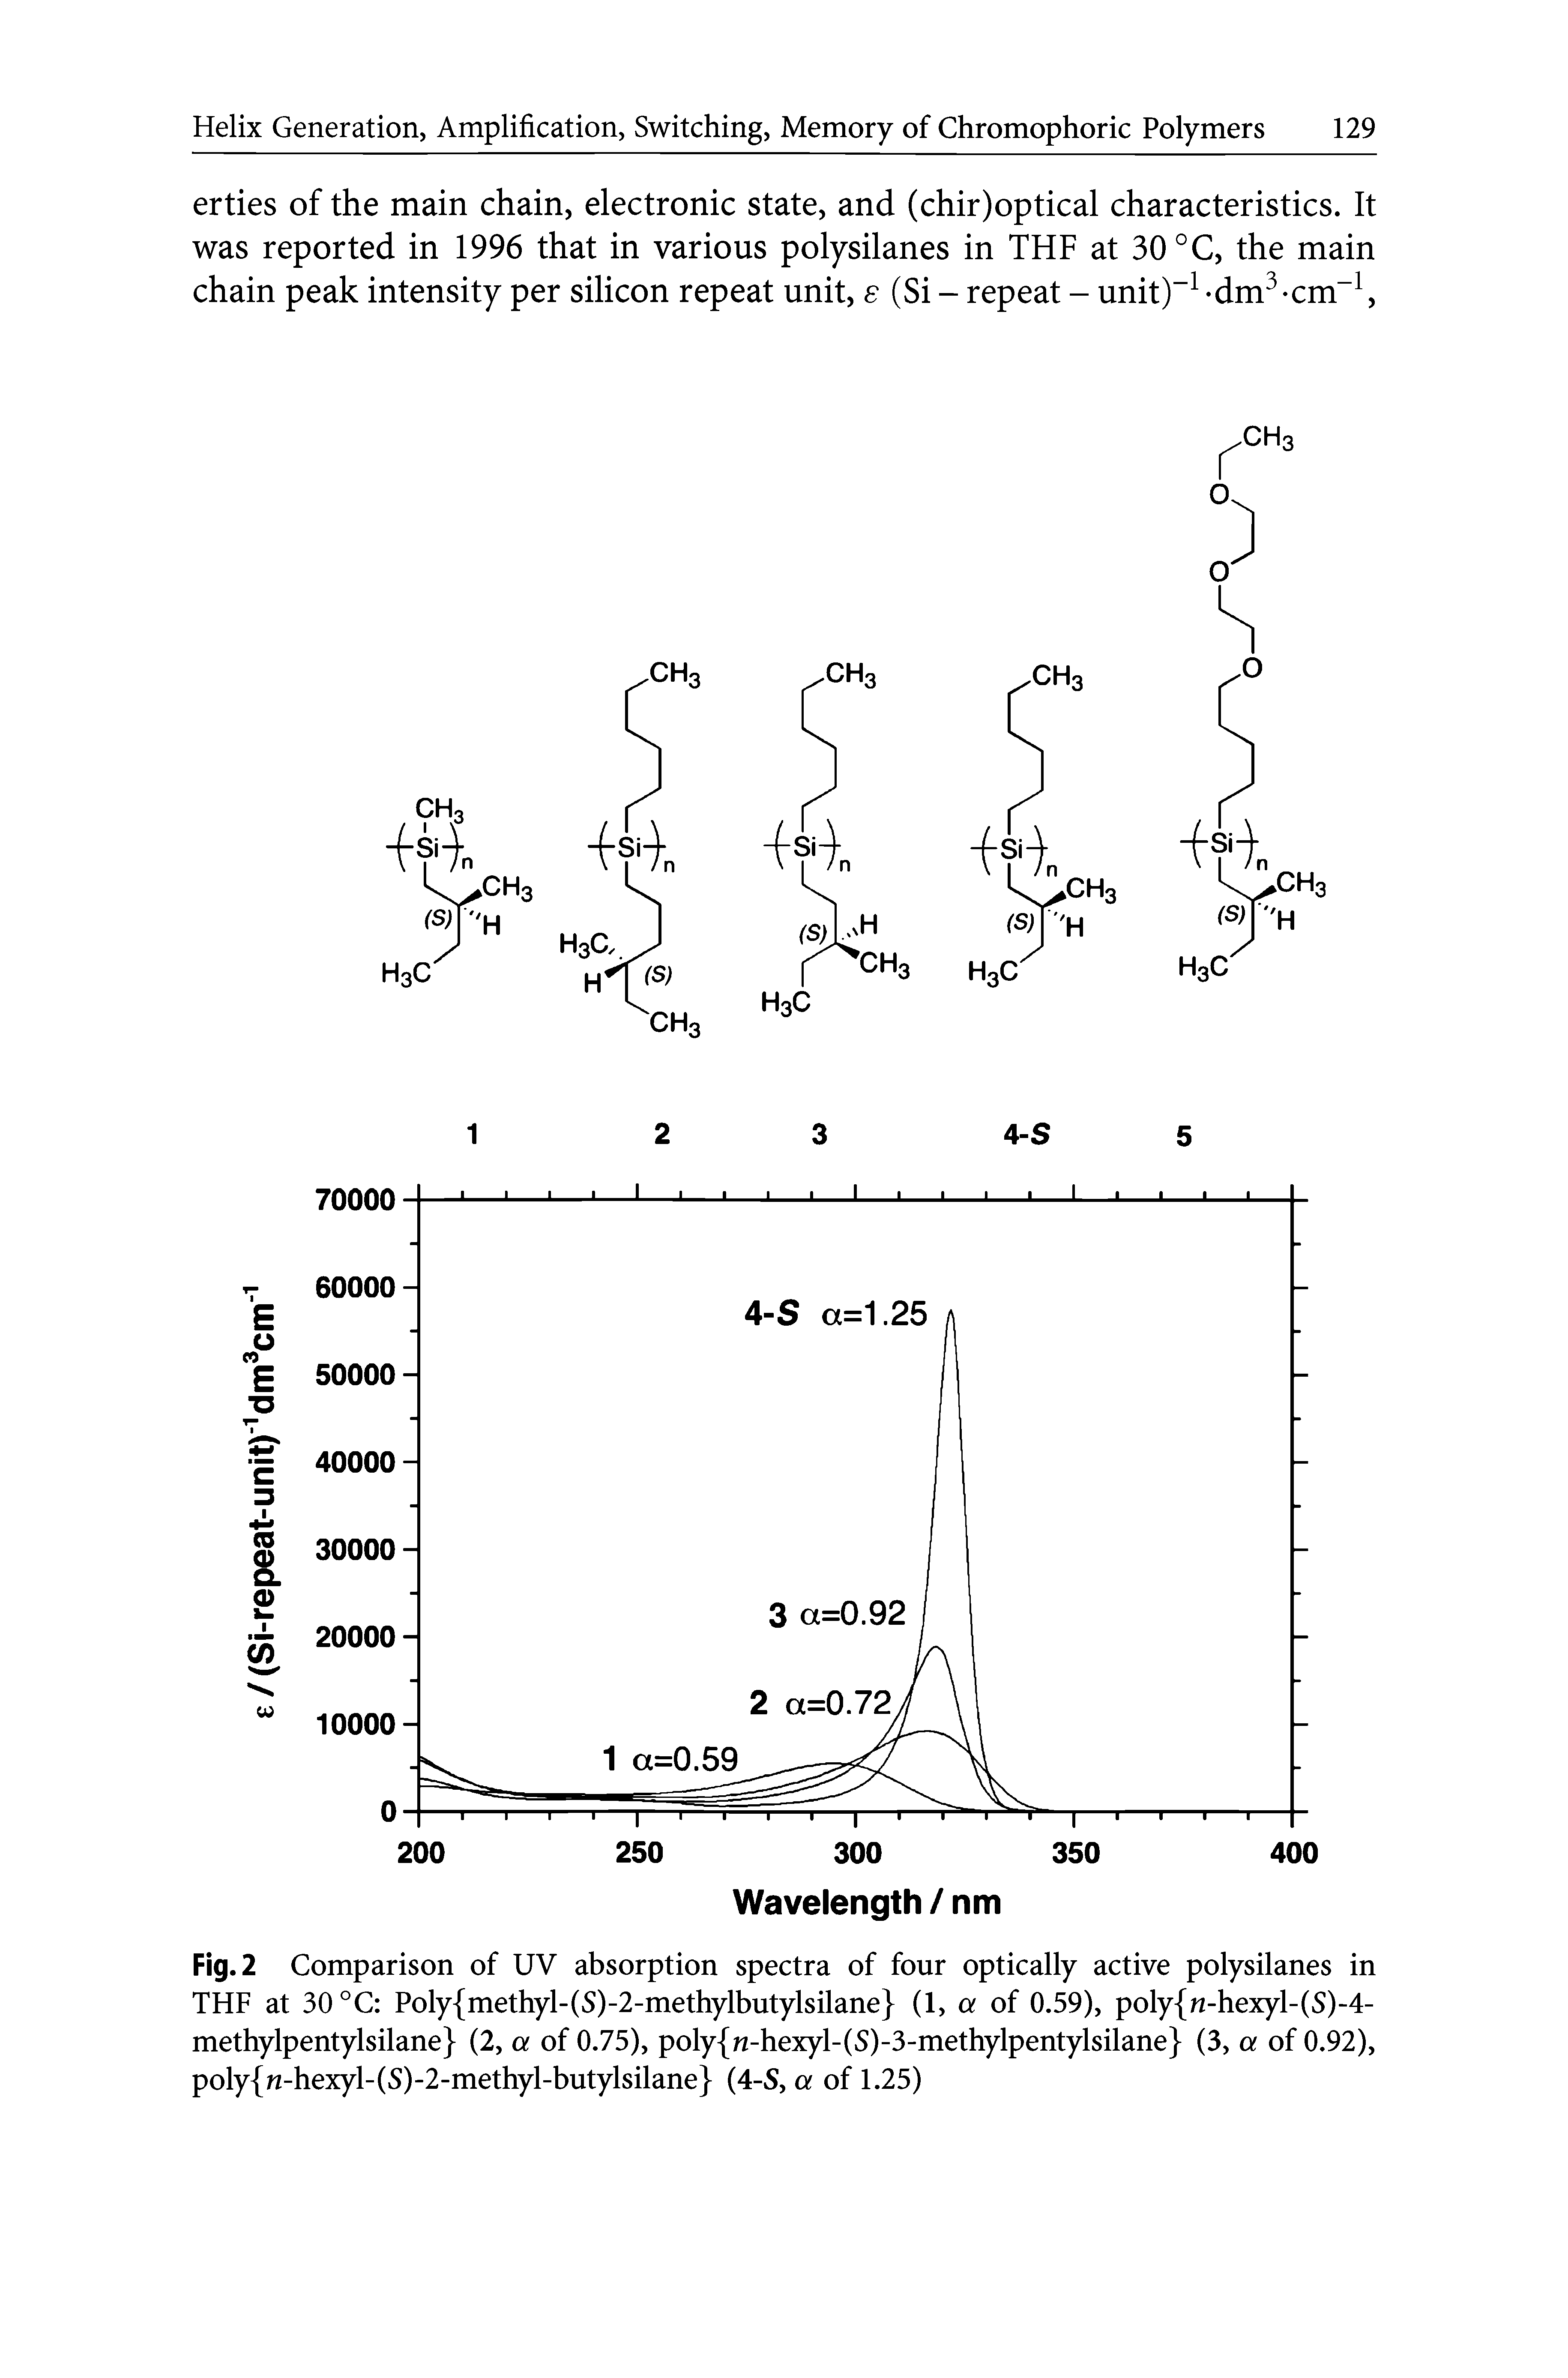 Fig. 2 Comparison of UV absorption spectra of four optically active polysilanes in THF at 30 °C Poly methyl-(S)-2-methylbutylsilane (1, a of 0.59), poly n-hexyl-(S)-4-methylpentylsilane (2, a of 0.75), poly n-hexyl-(S)-3-methylpentylsilane (3, a of 0.92), poly n-hexyl-(S)-2-methyl-butylsilane (4-S, a of 1.25)...